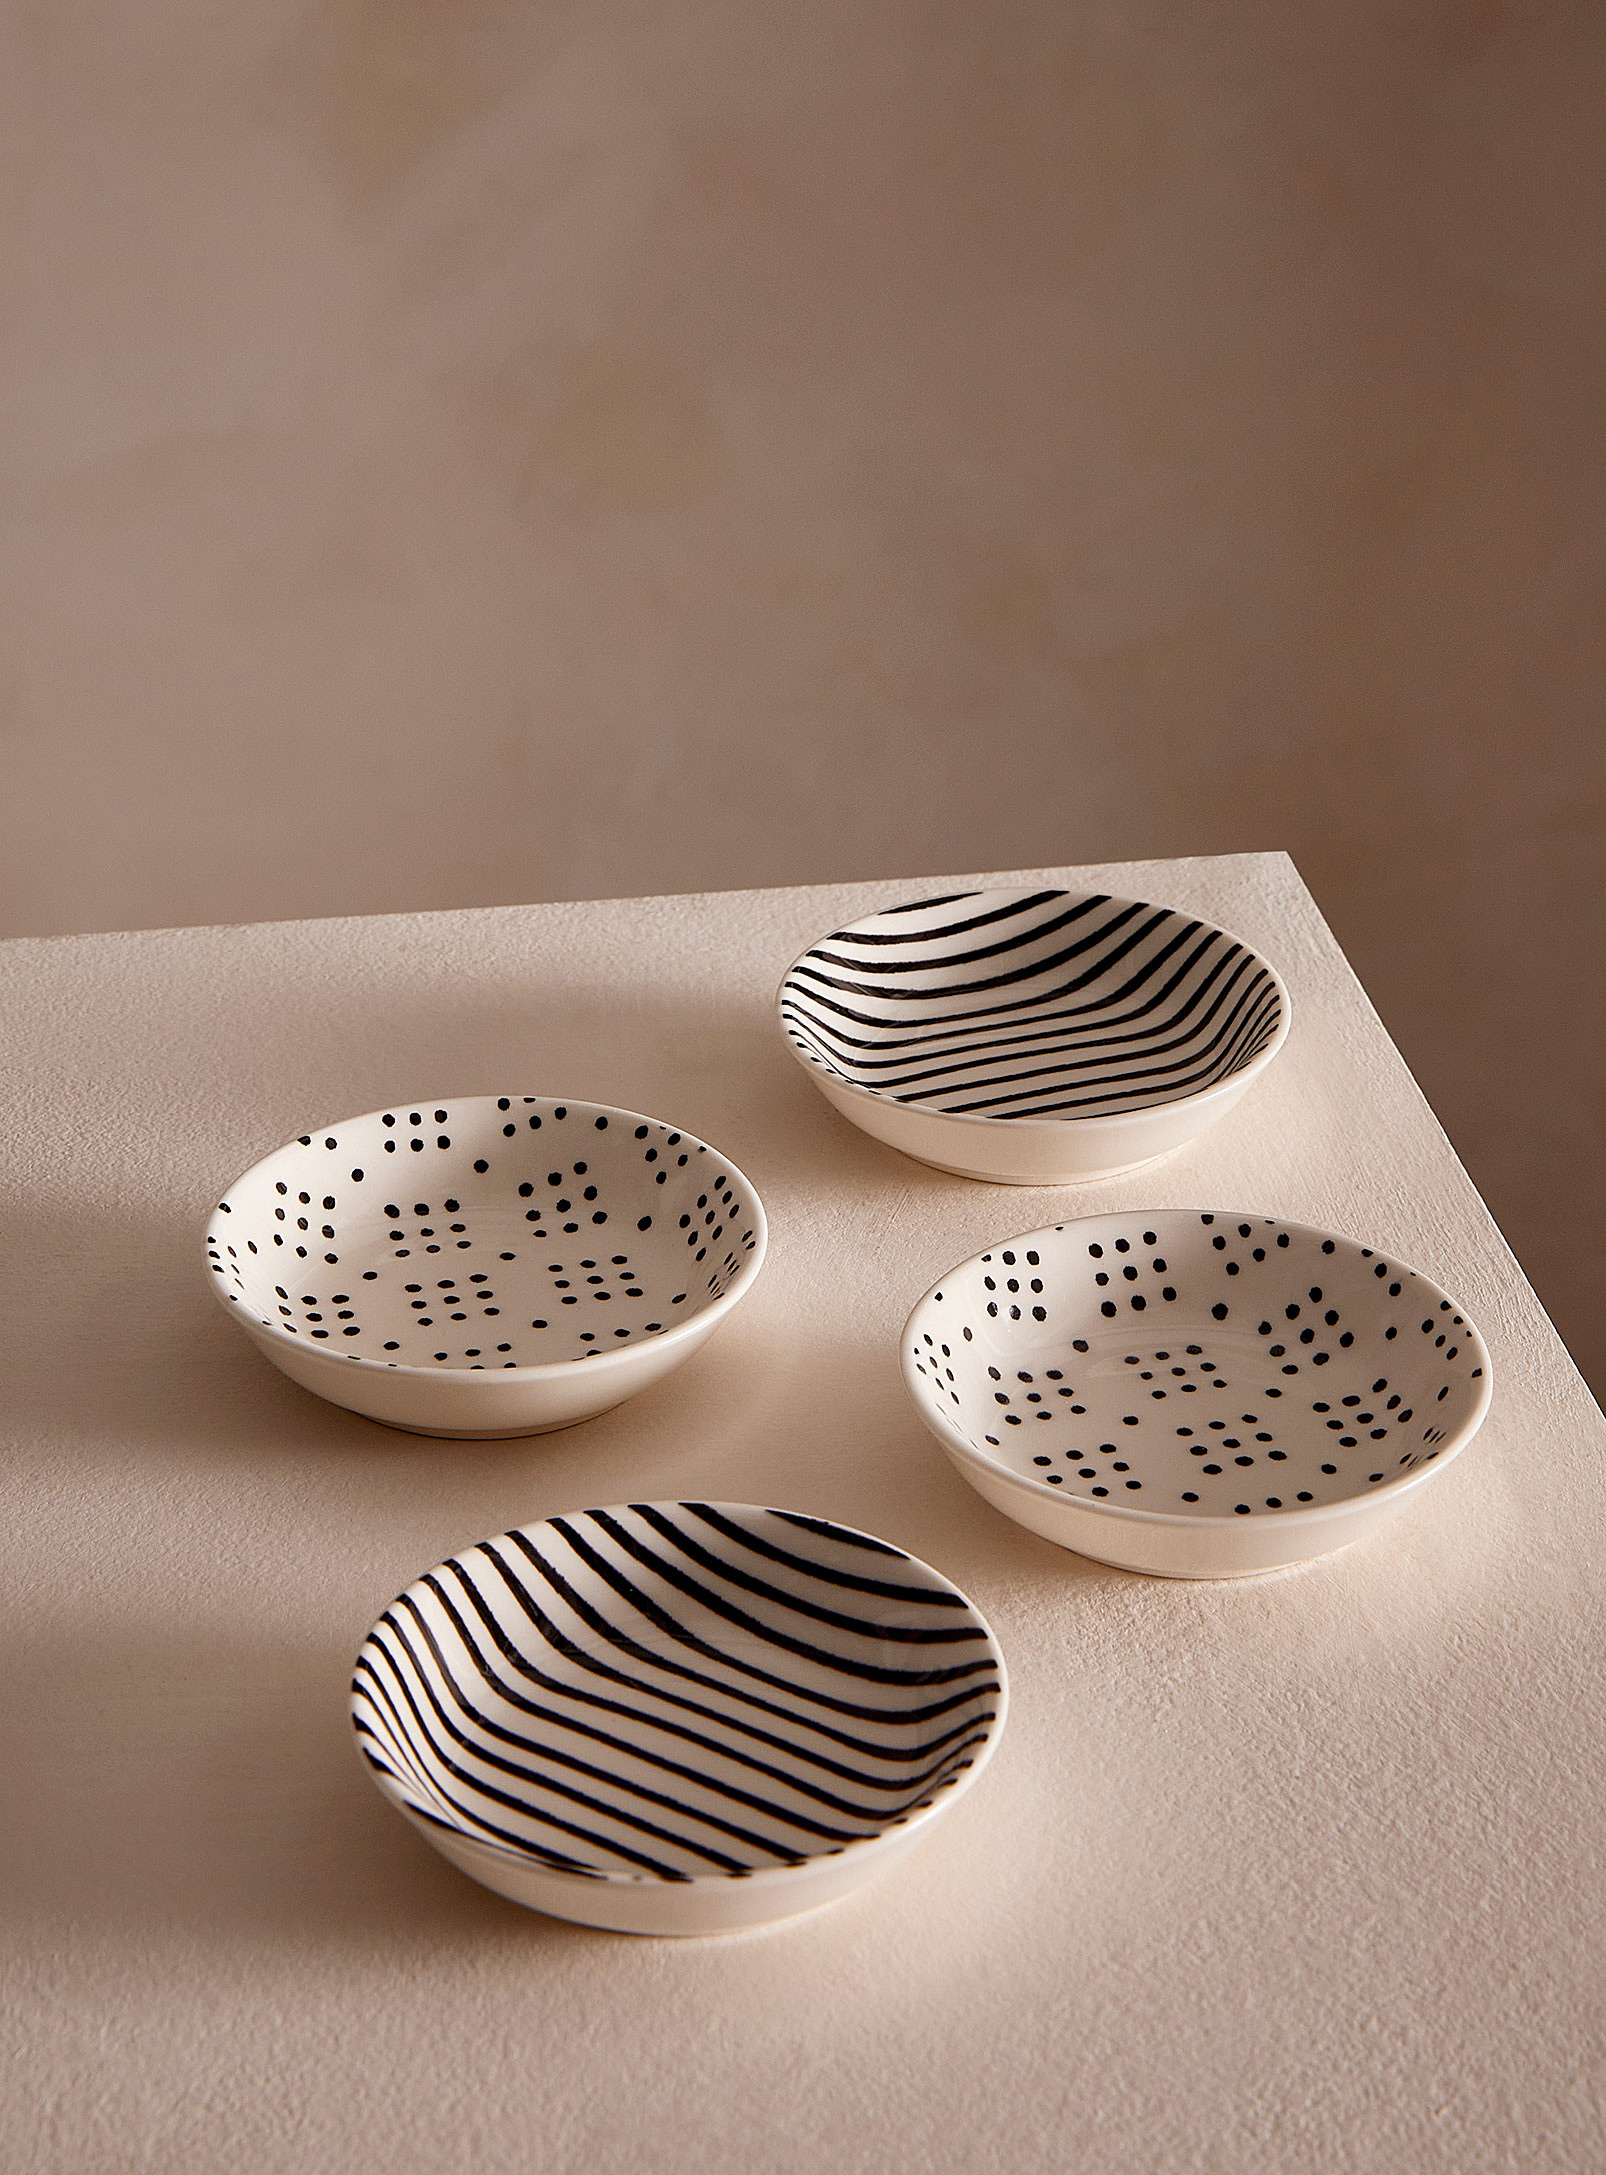 Simons Maison Linear Geometric Pinch Bowls Set Of 4 In Patterned White